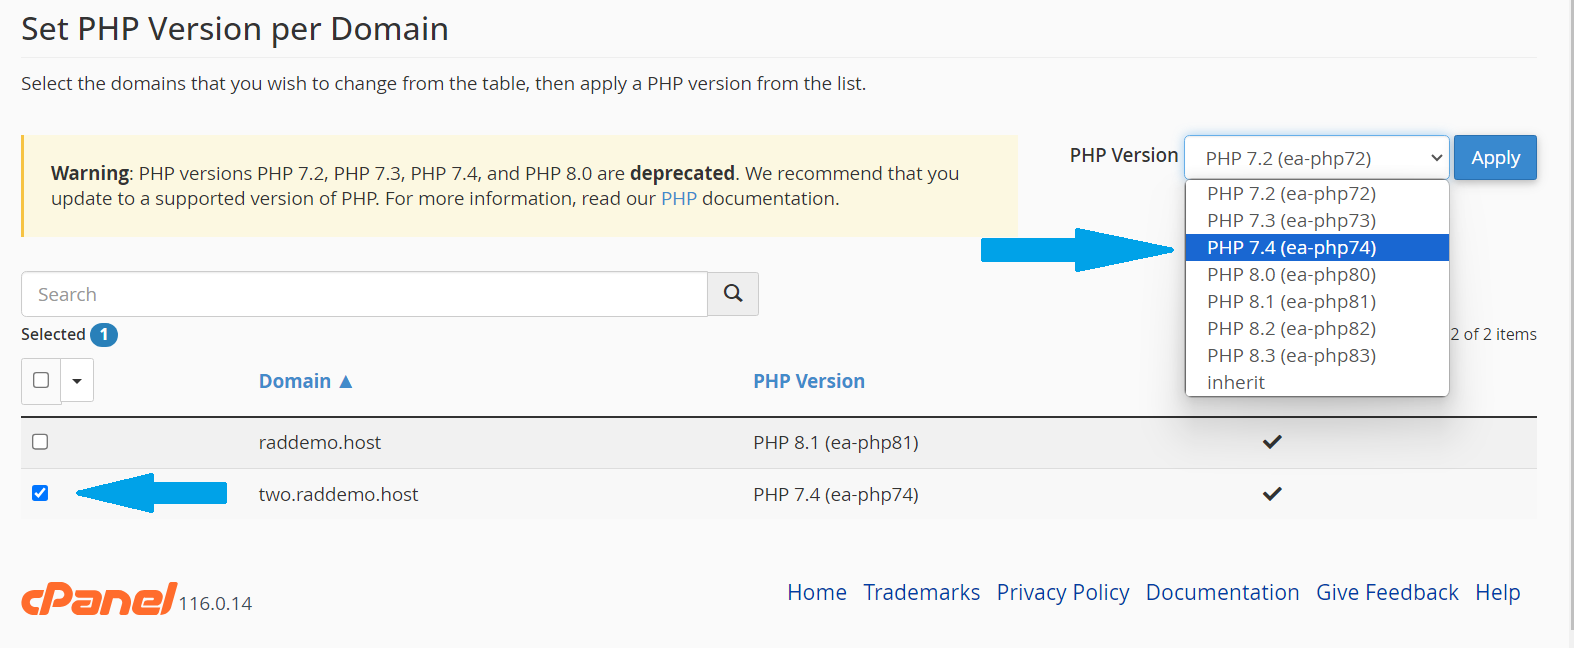 Select the domain and PHP version to modify